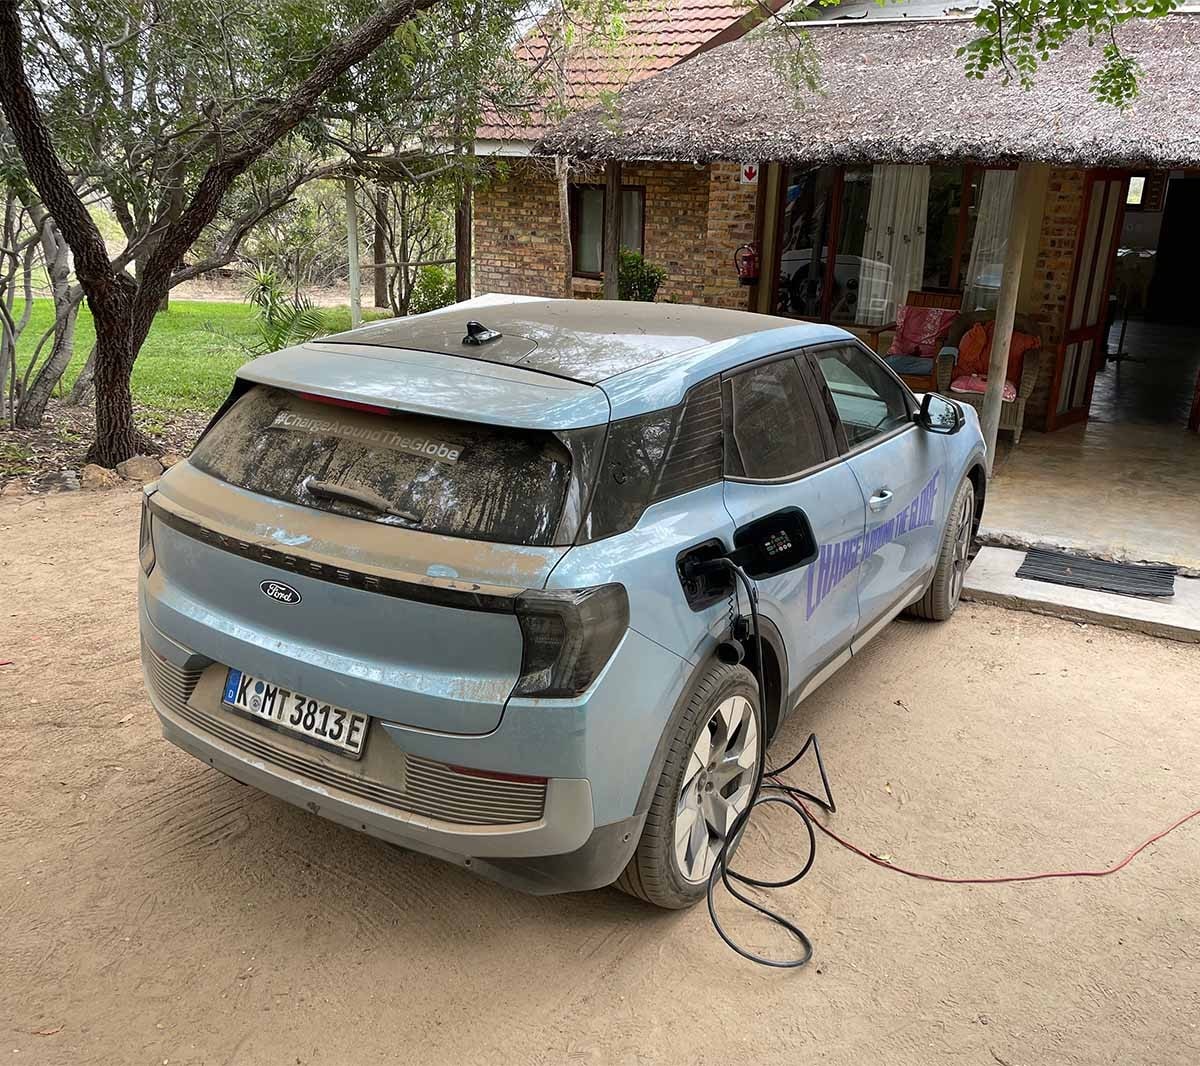 A moment to charge (and give the Ford Explorer a quick wipe-down)